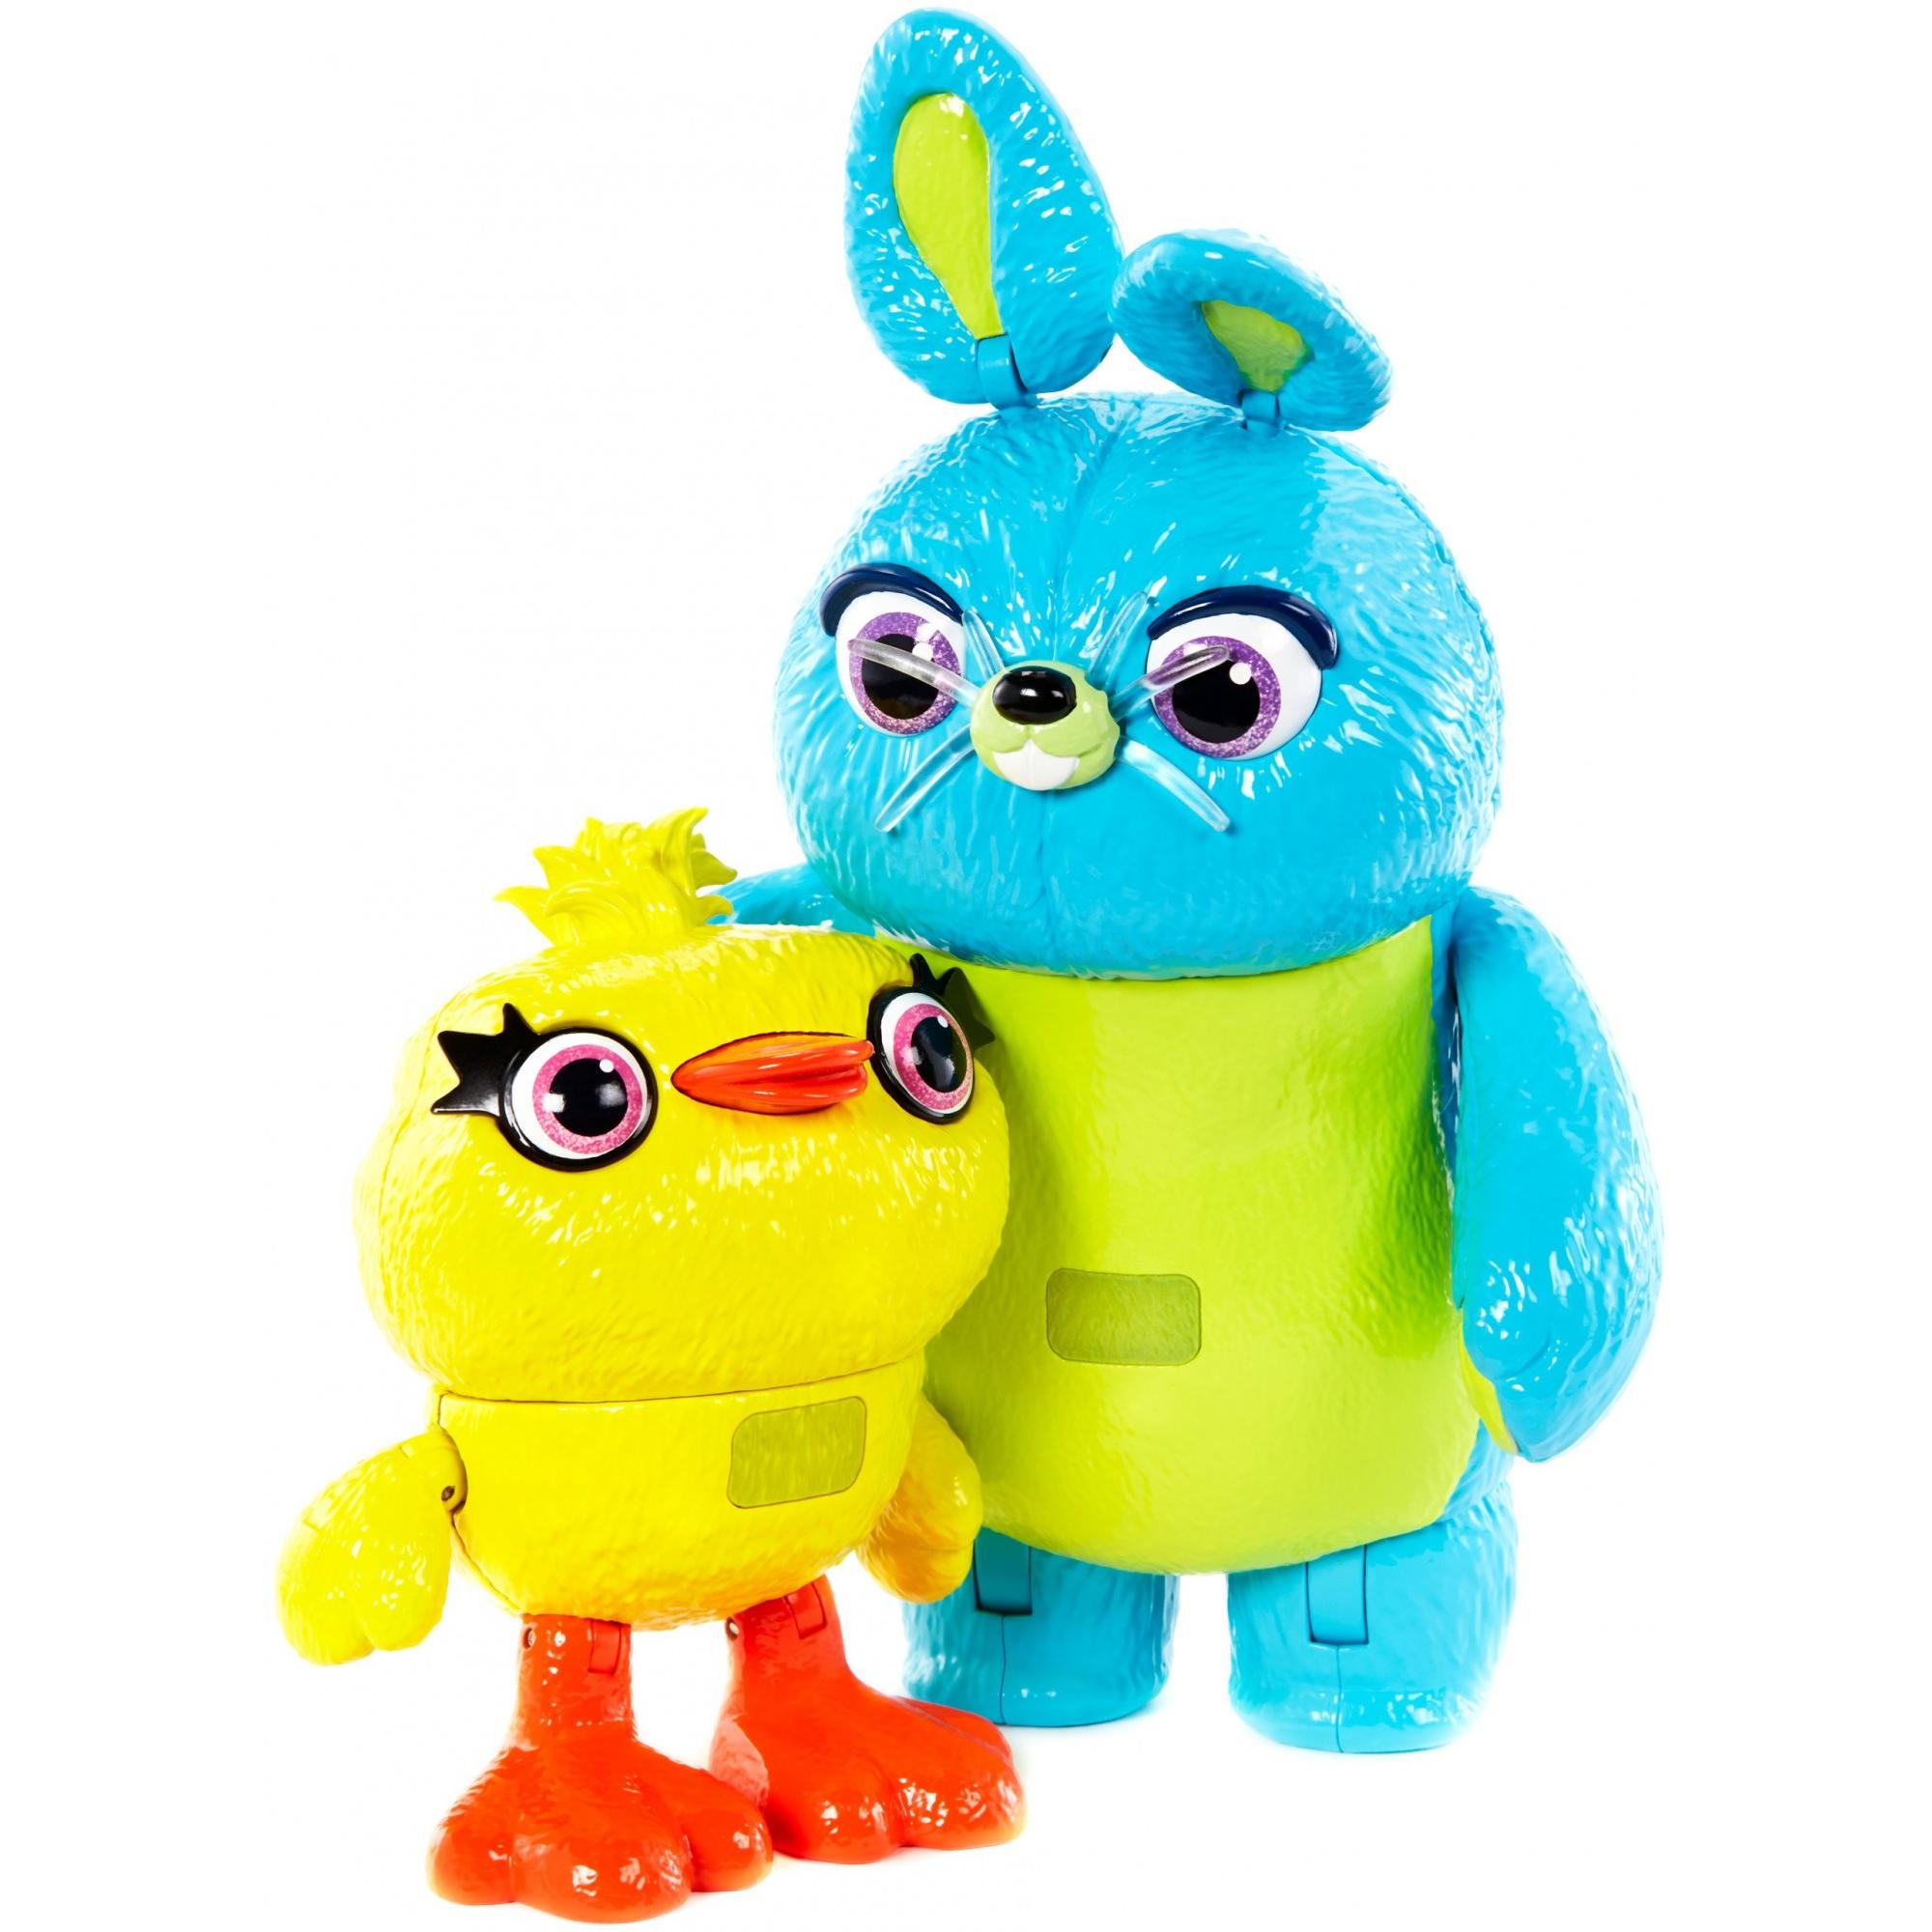 Disney Pixar Toy Story Interactive True Talkers Bunny and Ducky 2-Pack - image 4 of 5